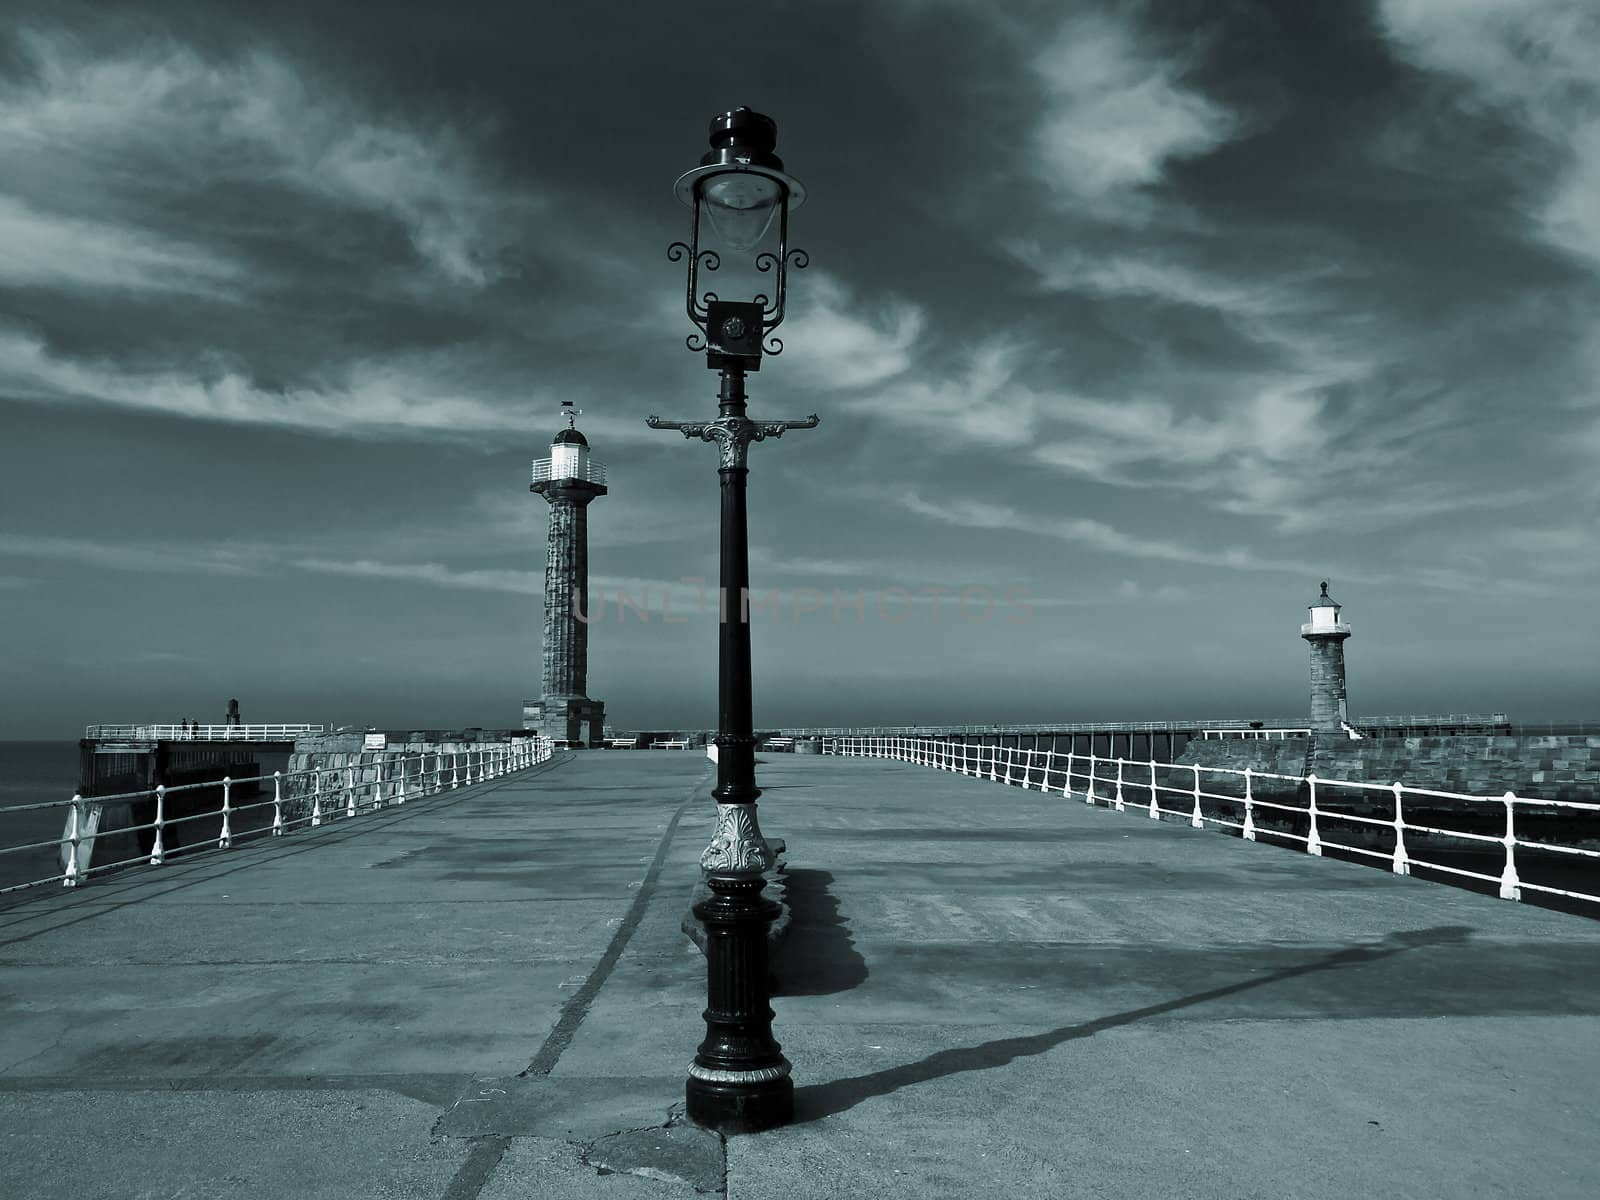 A dramattic image of Whitby Pier black and white toned